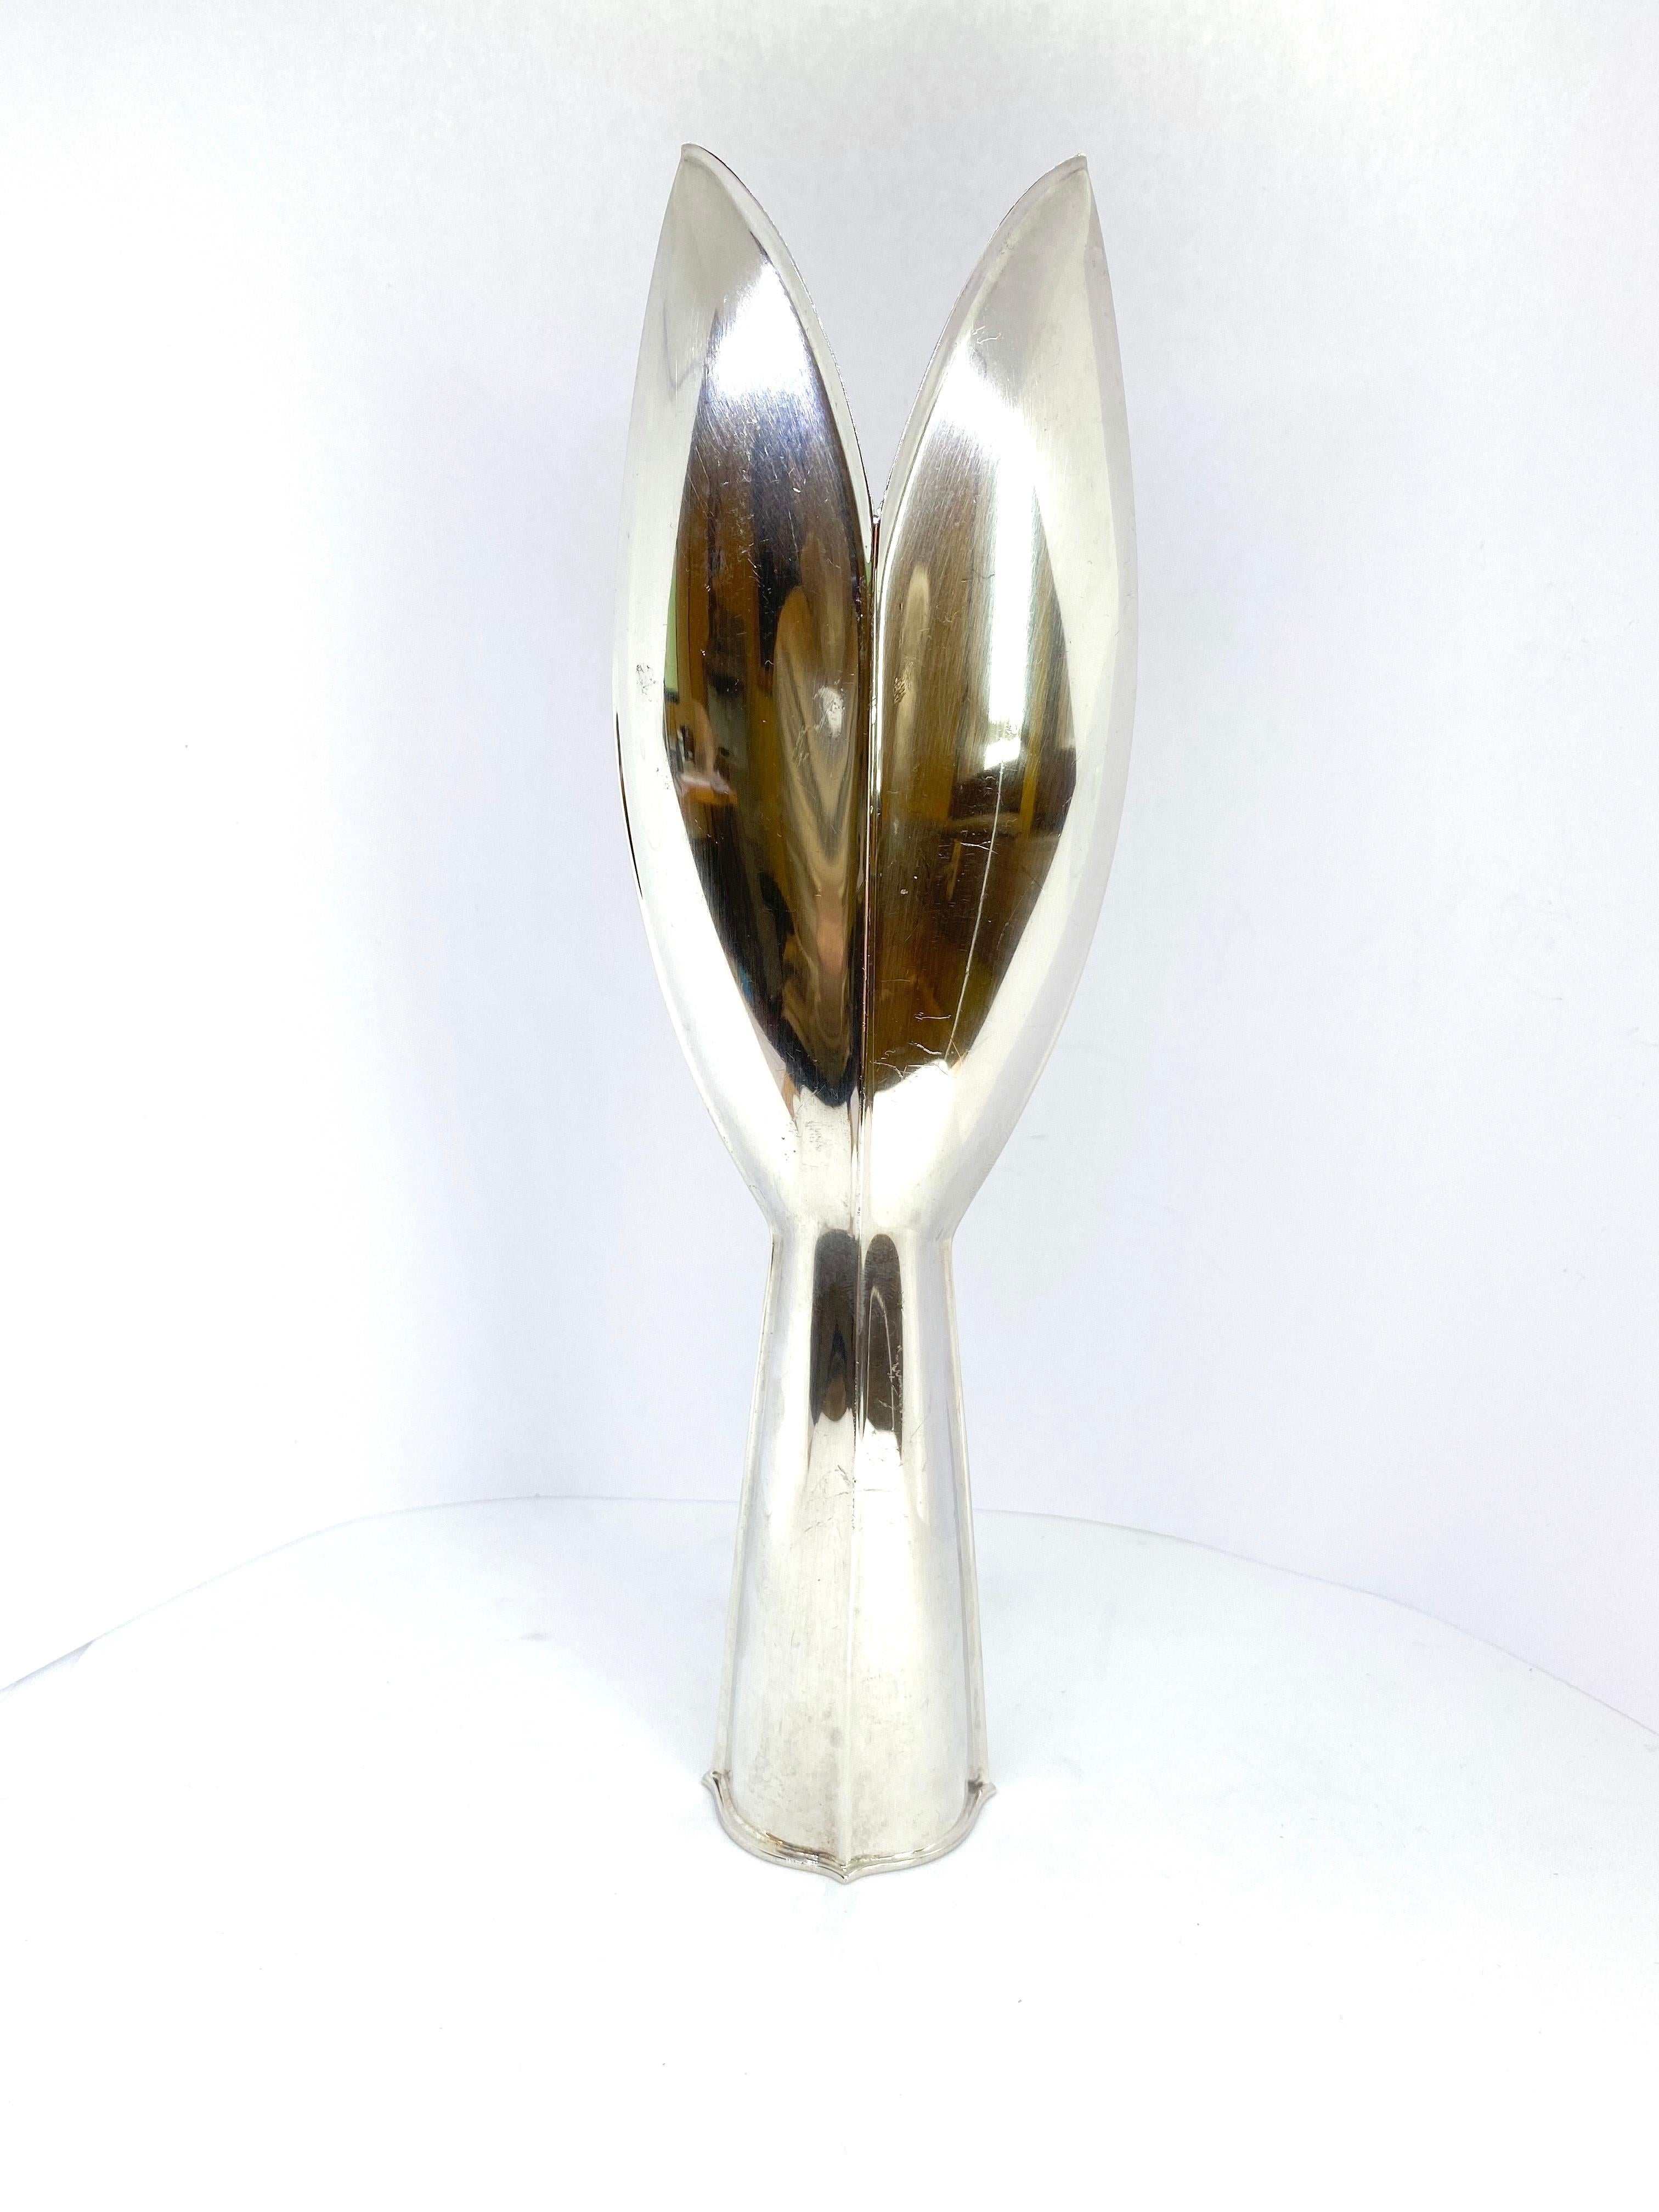 Sterling 916H Silver 1959 Tapio Wirkkala Kultakeskus Oy TW 2 Tulip Vase
Height 24,5cm

Tapio Wirkkala (1915-1985) rose to world fame in the early 1950s following the breakthrough of Finnish industrial design. He was an exceptionally prolific artist